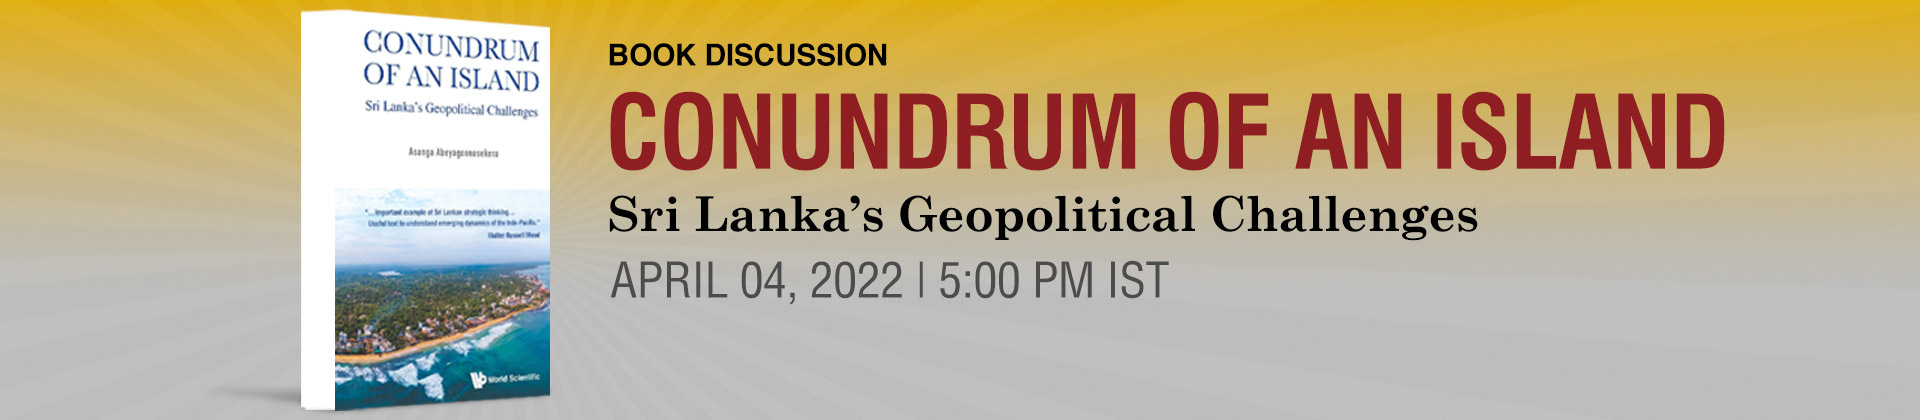 Book Discussion | Conundrum of an Island: Sri Lanka’s Geopolitical Challenges